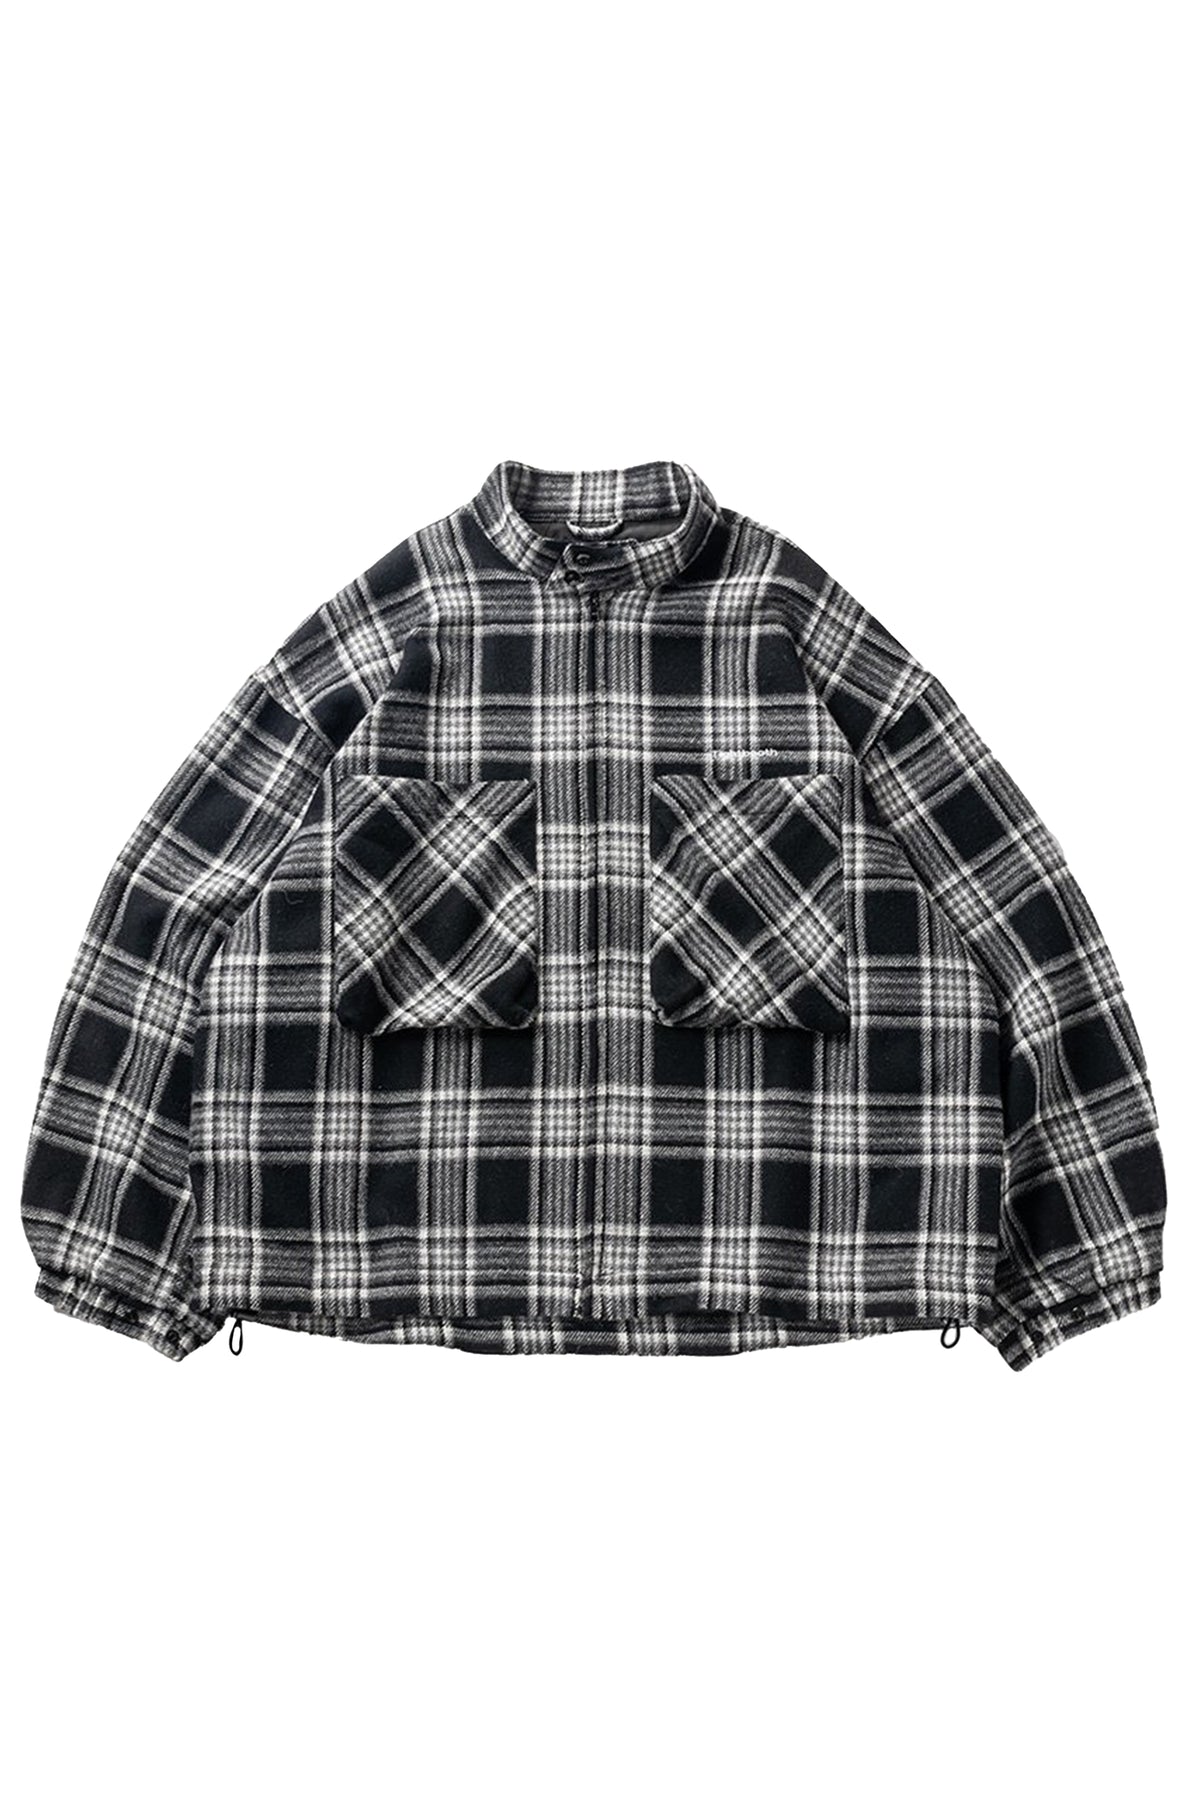 TIGHTBOOTH PLAID FLANNEL SWING TOP / BLK